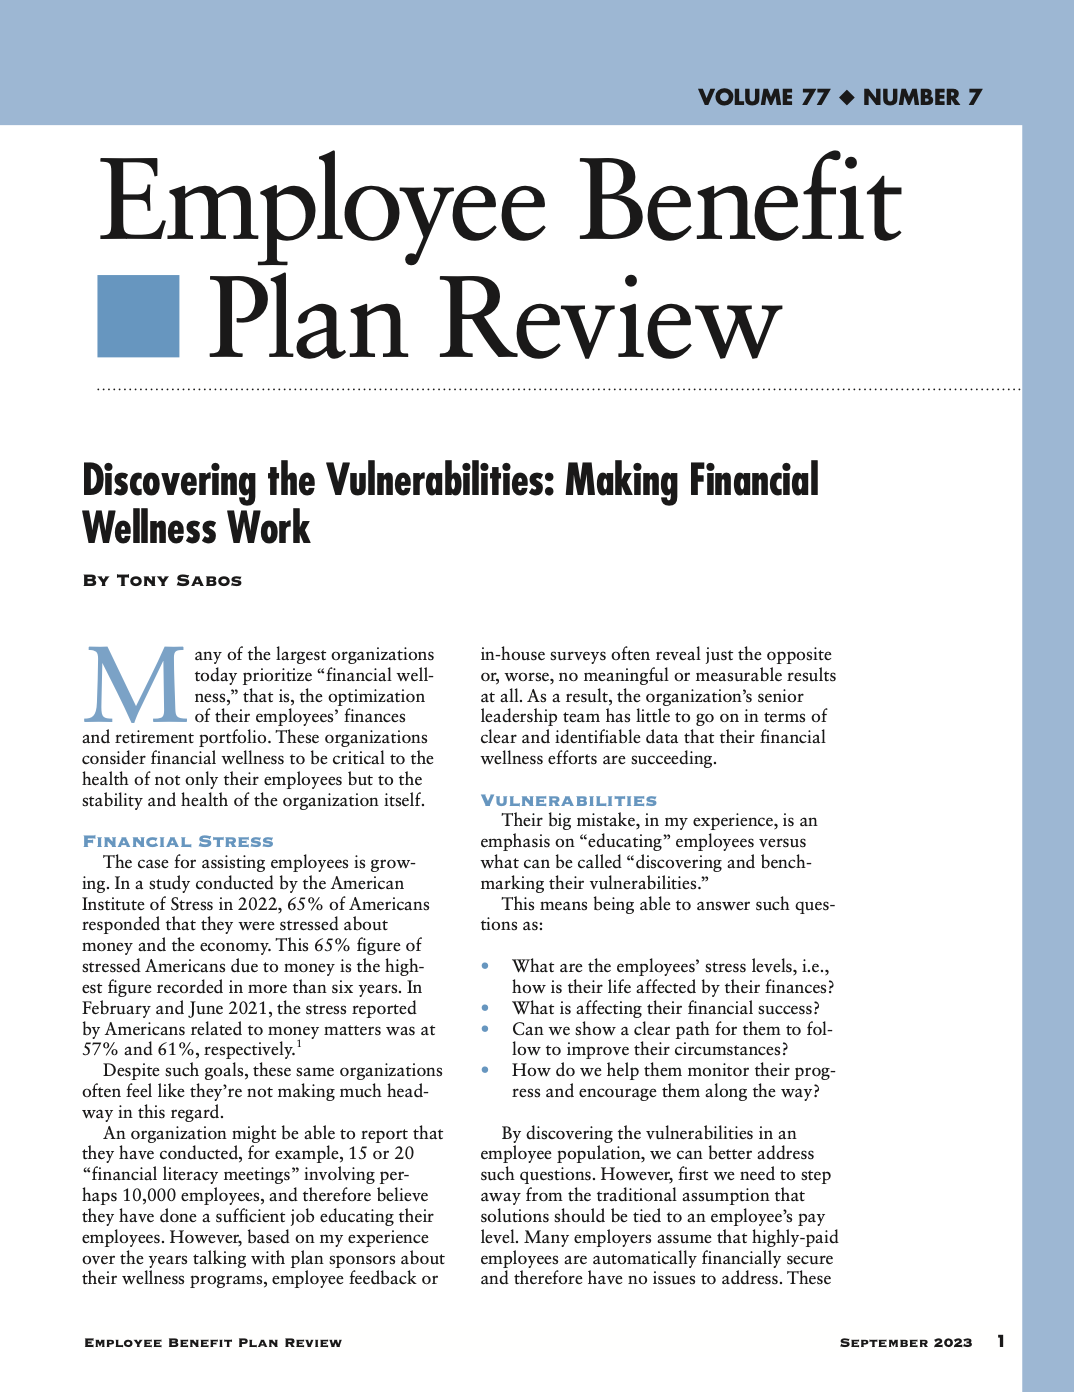 Employee Benefit Plan Review Article Cover